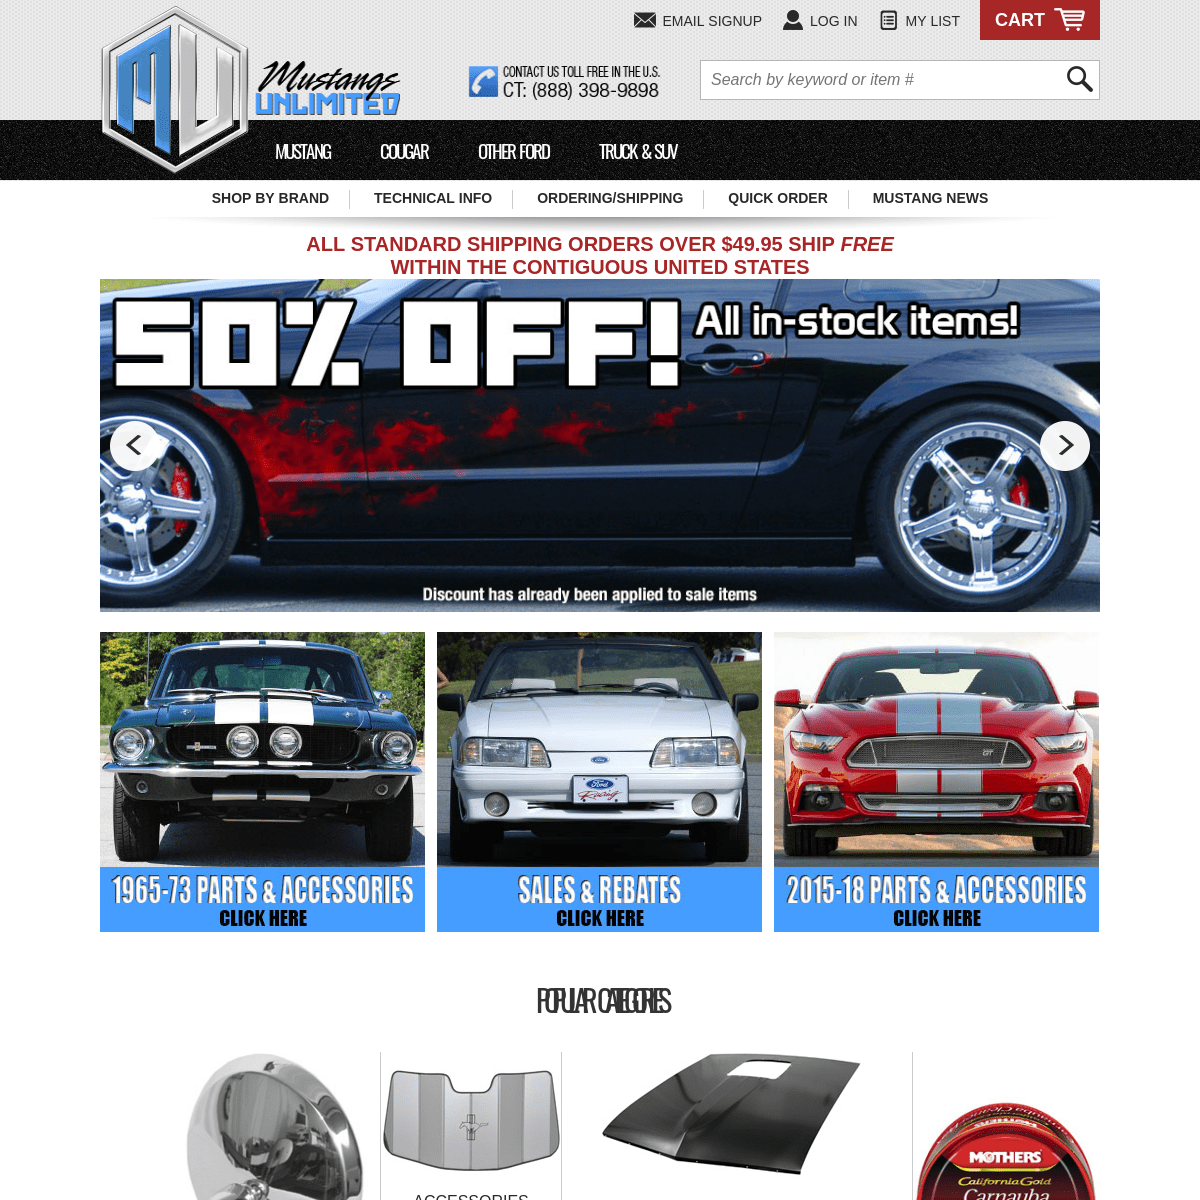 A complete backup of mustangsunlimited.com